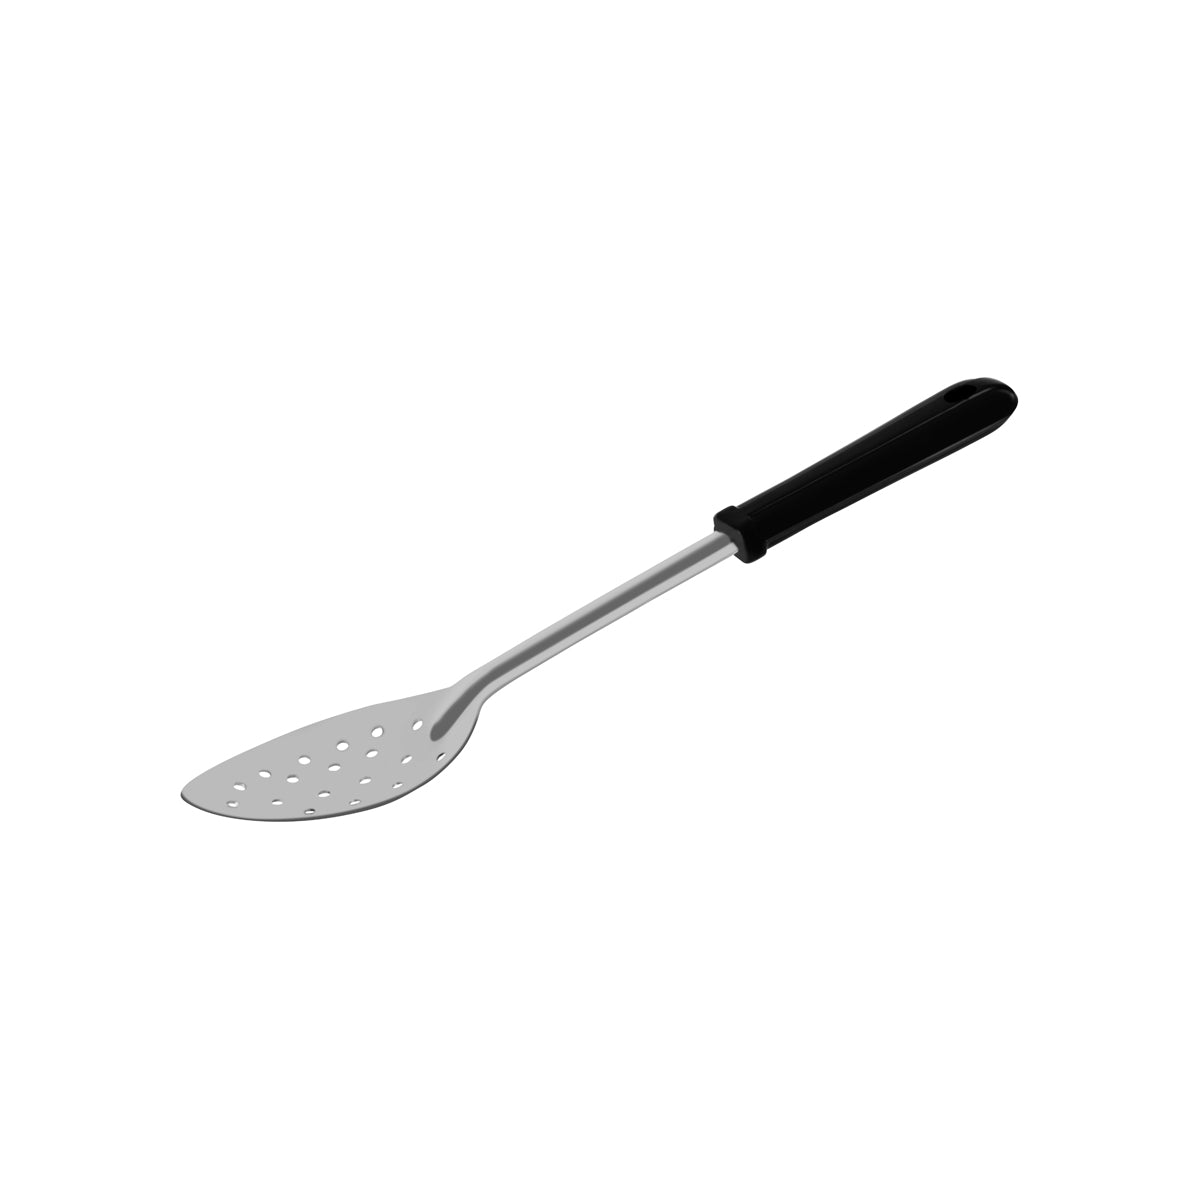 36123 Chef Inox Spoon Basting Perforated with Polypropylene Handle 330mm Tomkin Australia Hospitality Supplies